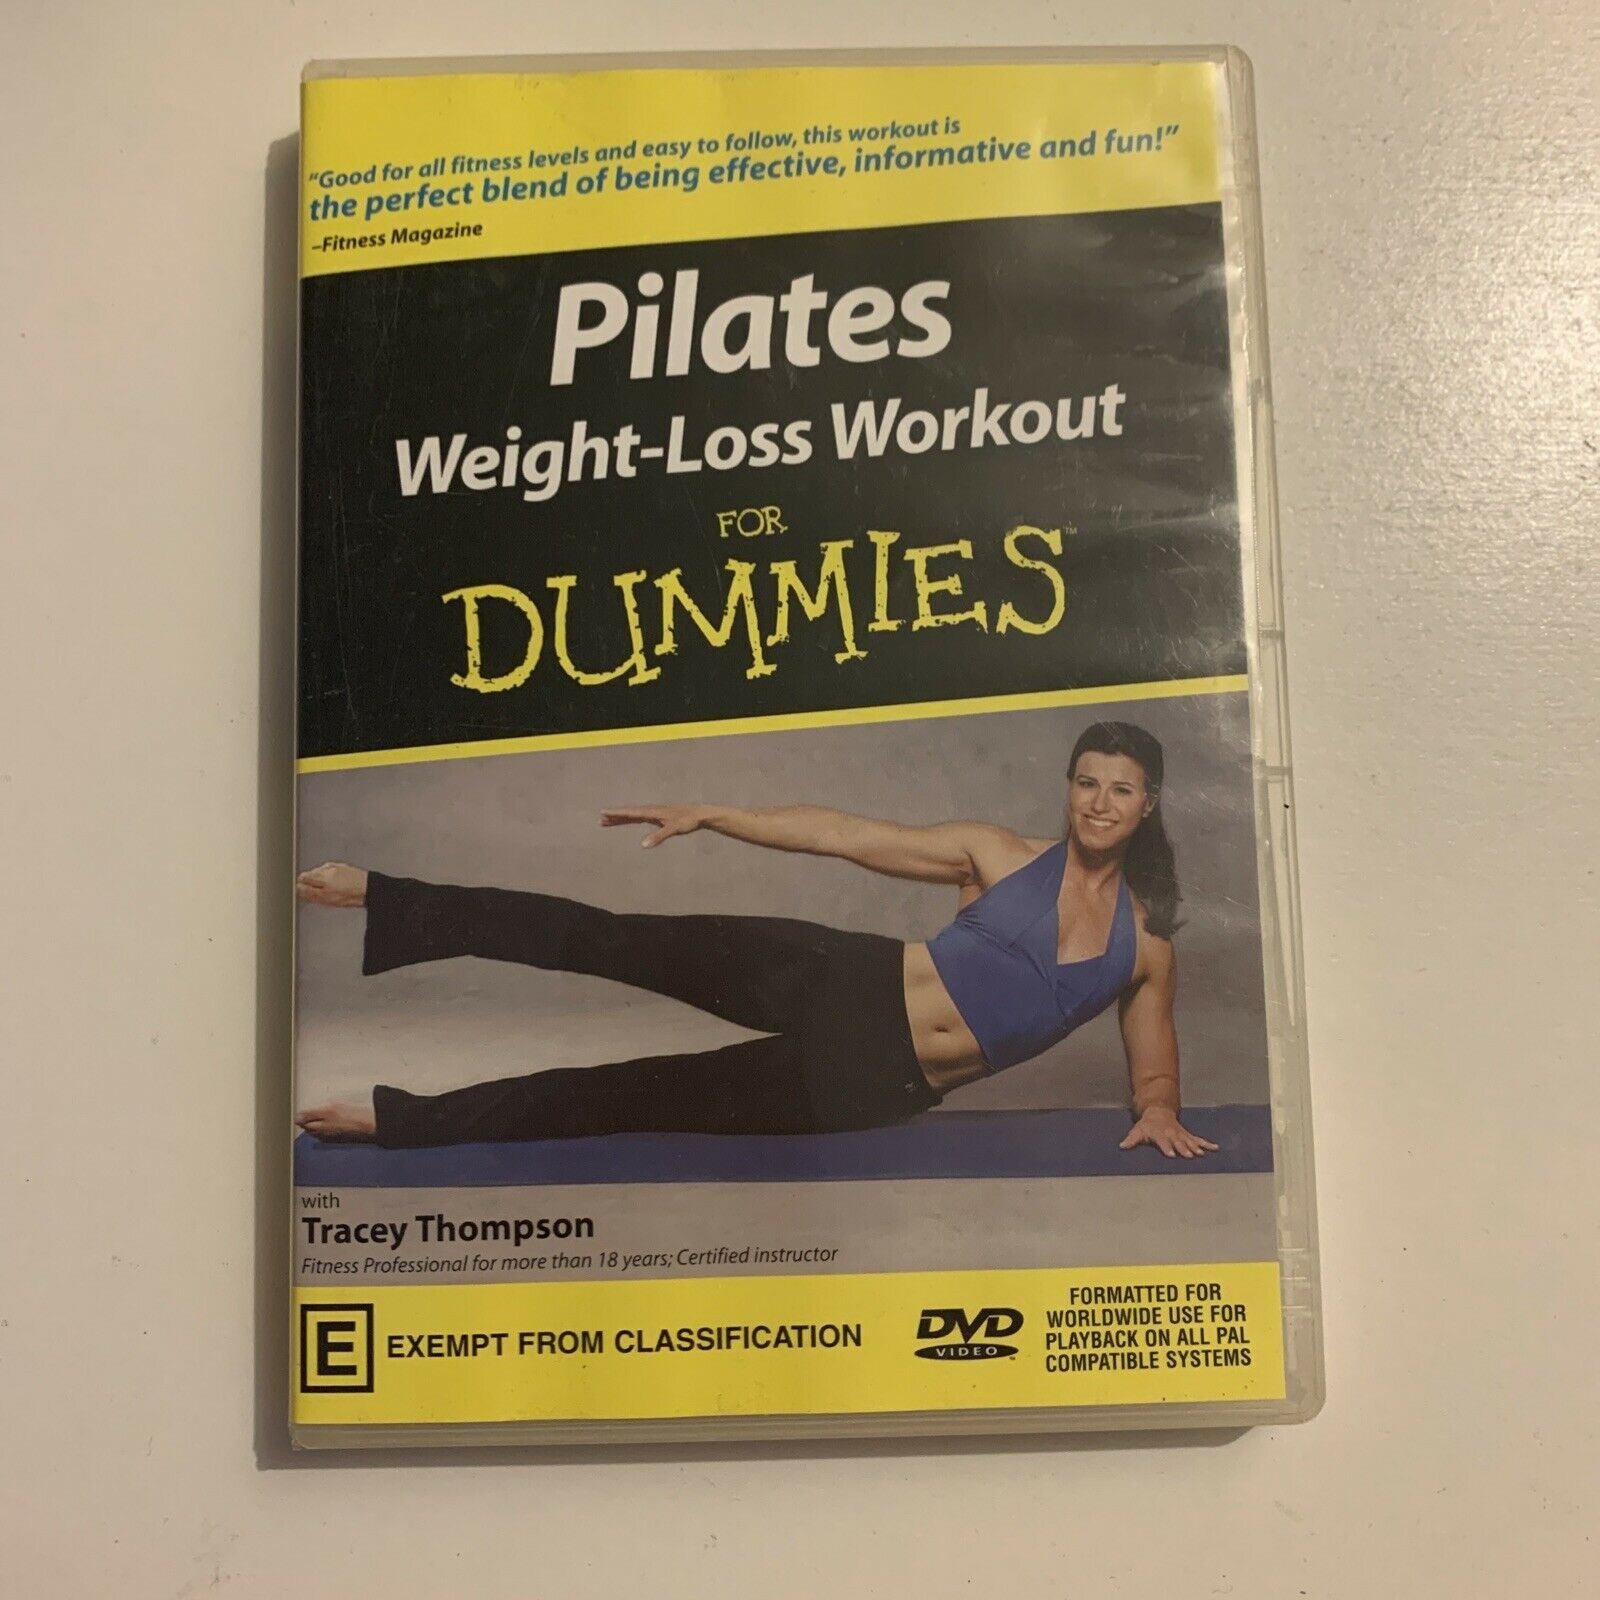 Pilates Weight Loss Workout For Dummies (DVD, 2002) All Regions